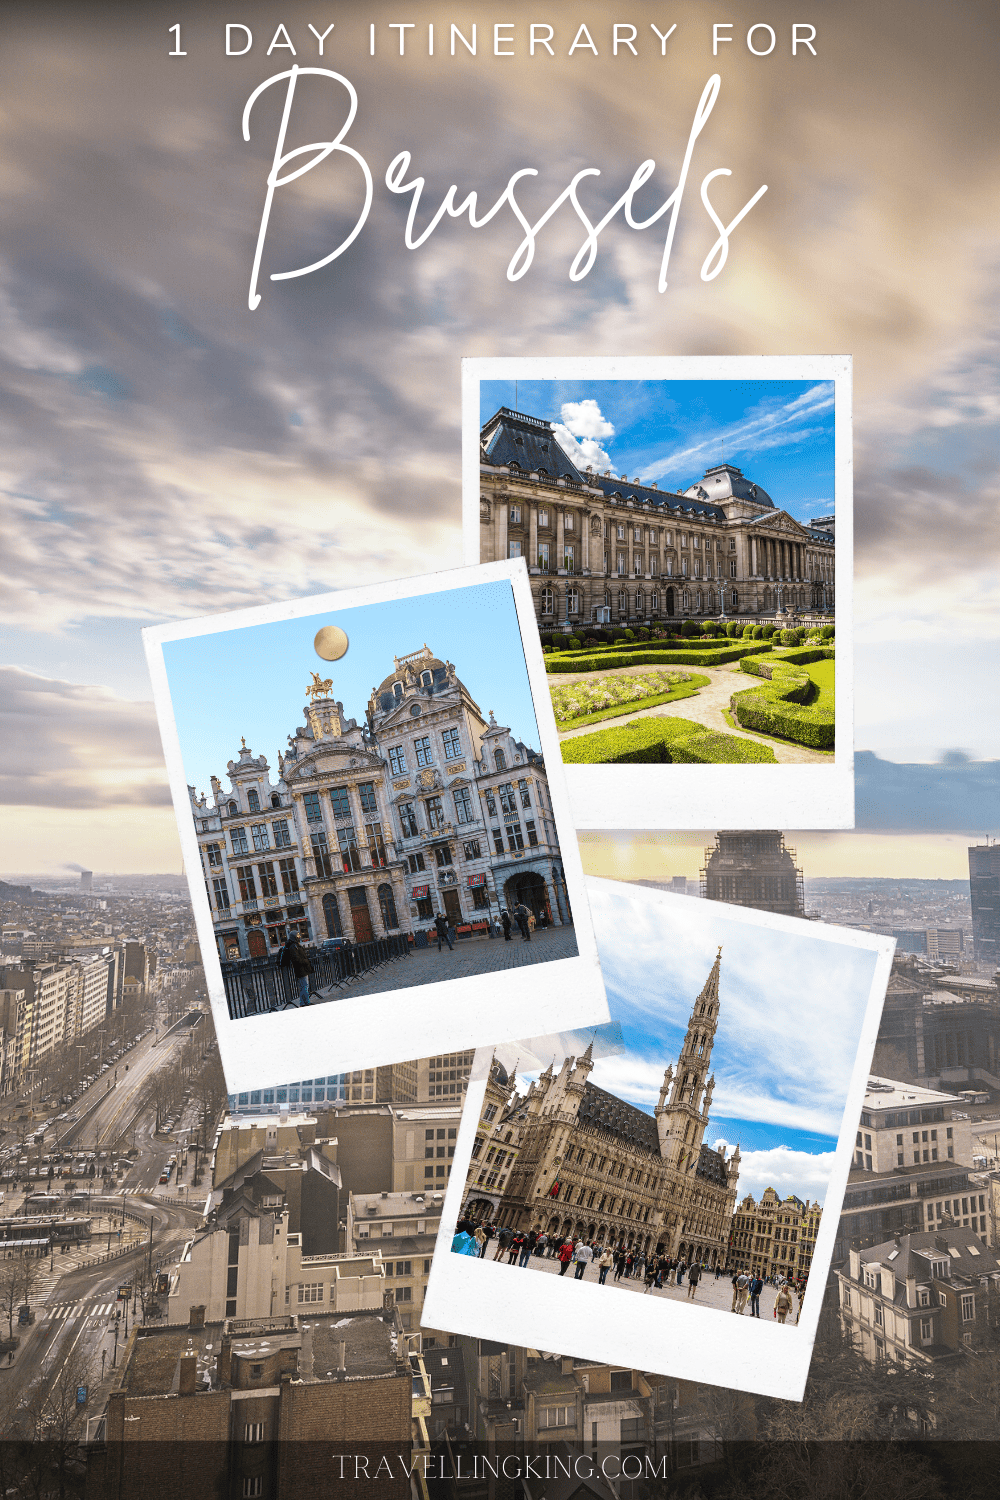 1 Day Itinerary for Brussels